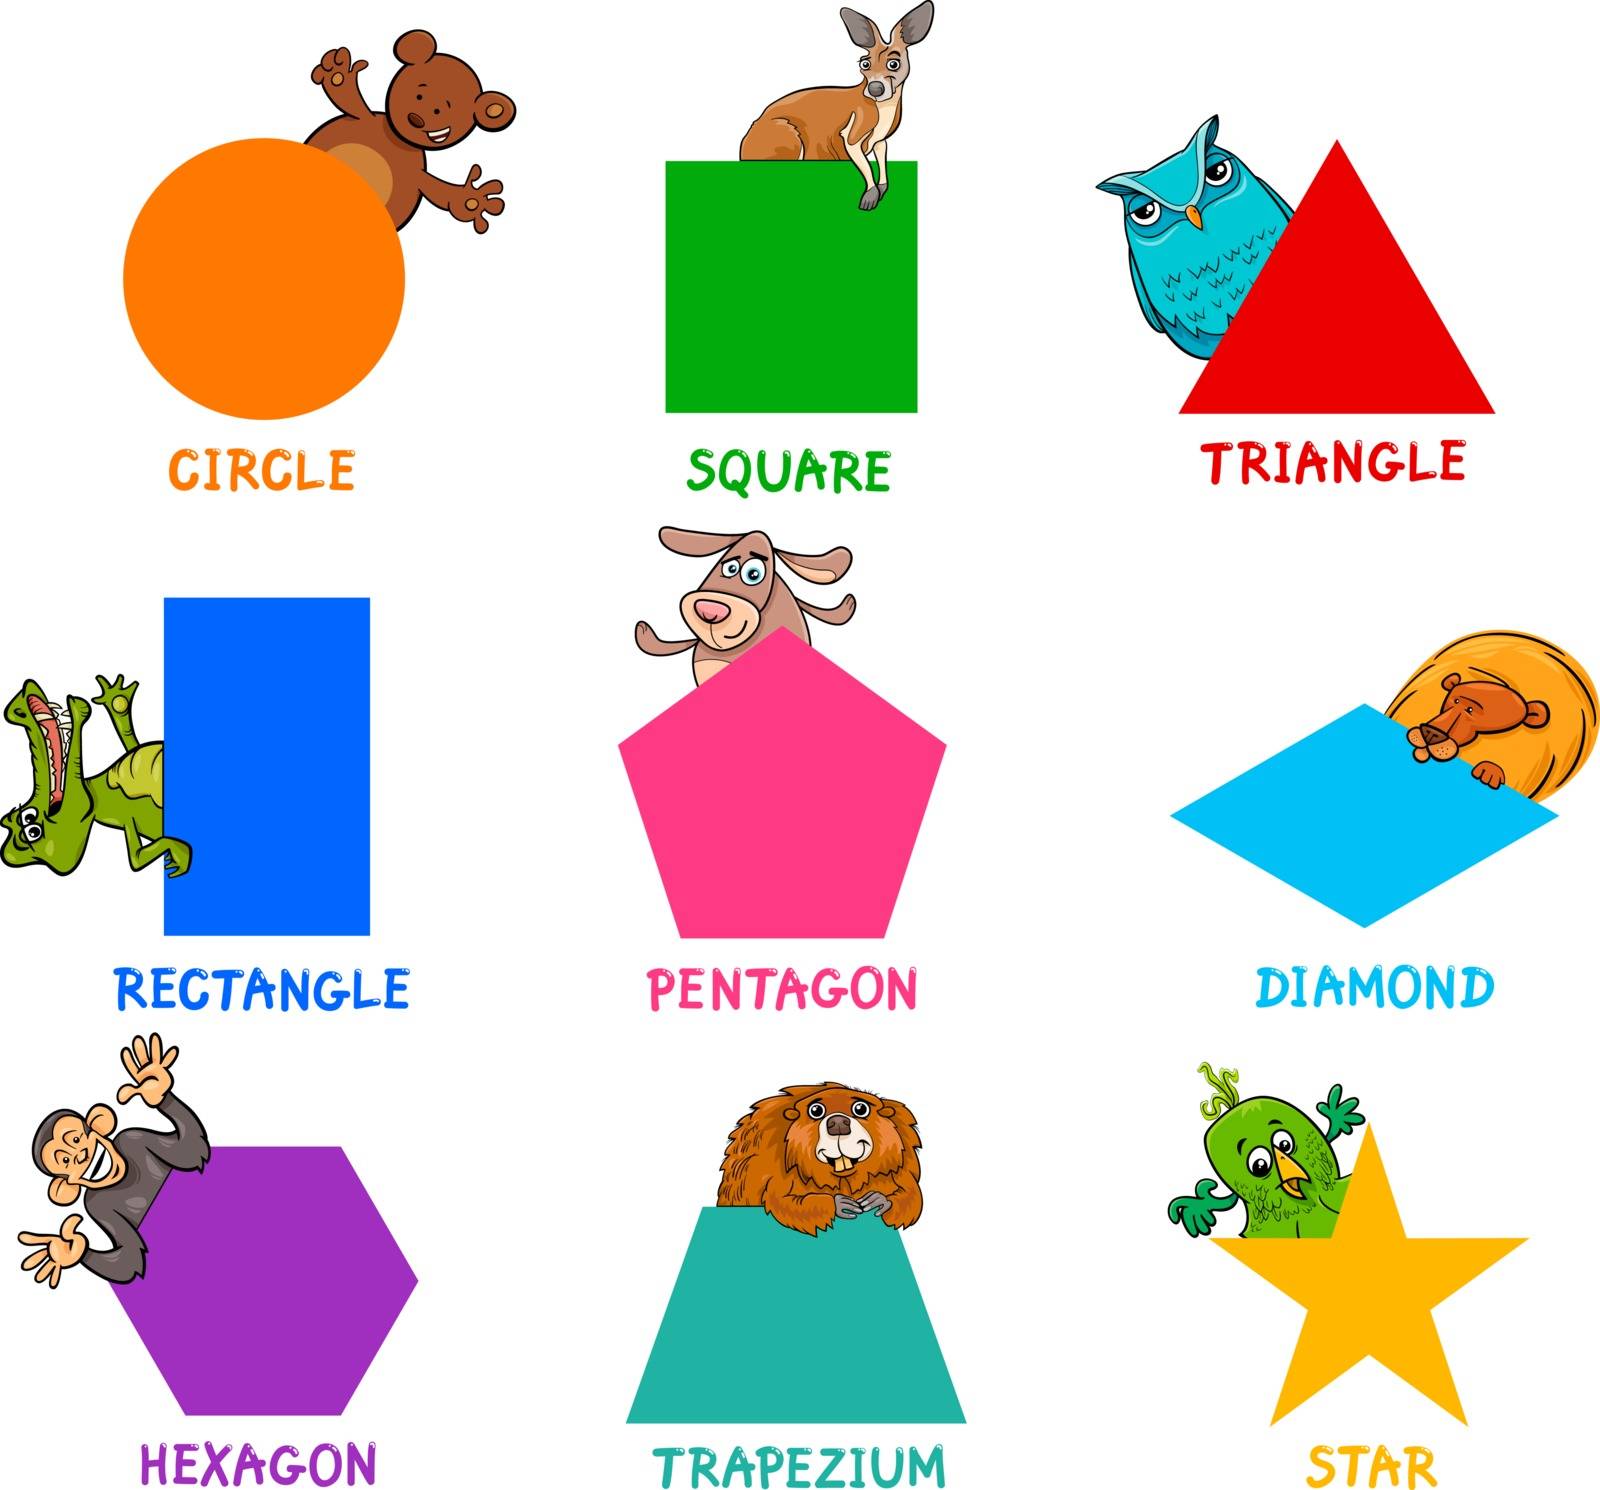 Educational Cartoon Illustration of Basic Geometric Shapes with Captions and Animal Characters for Children